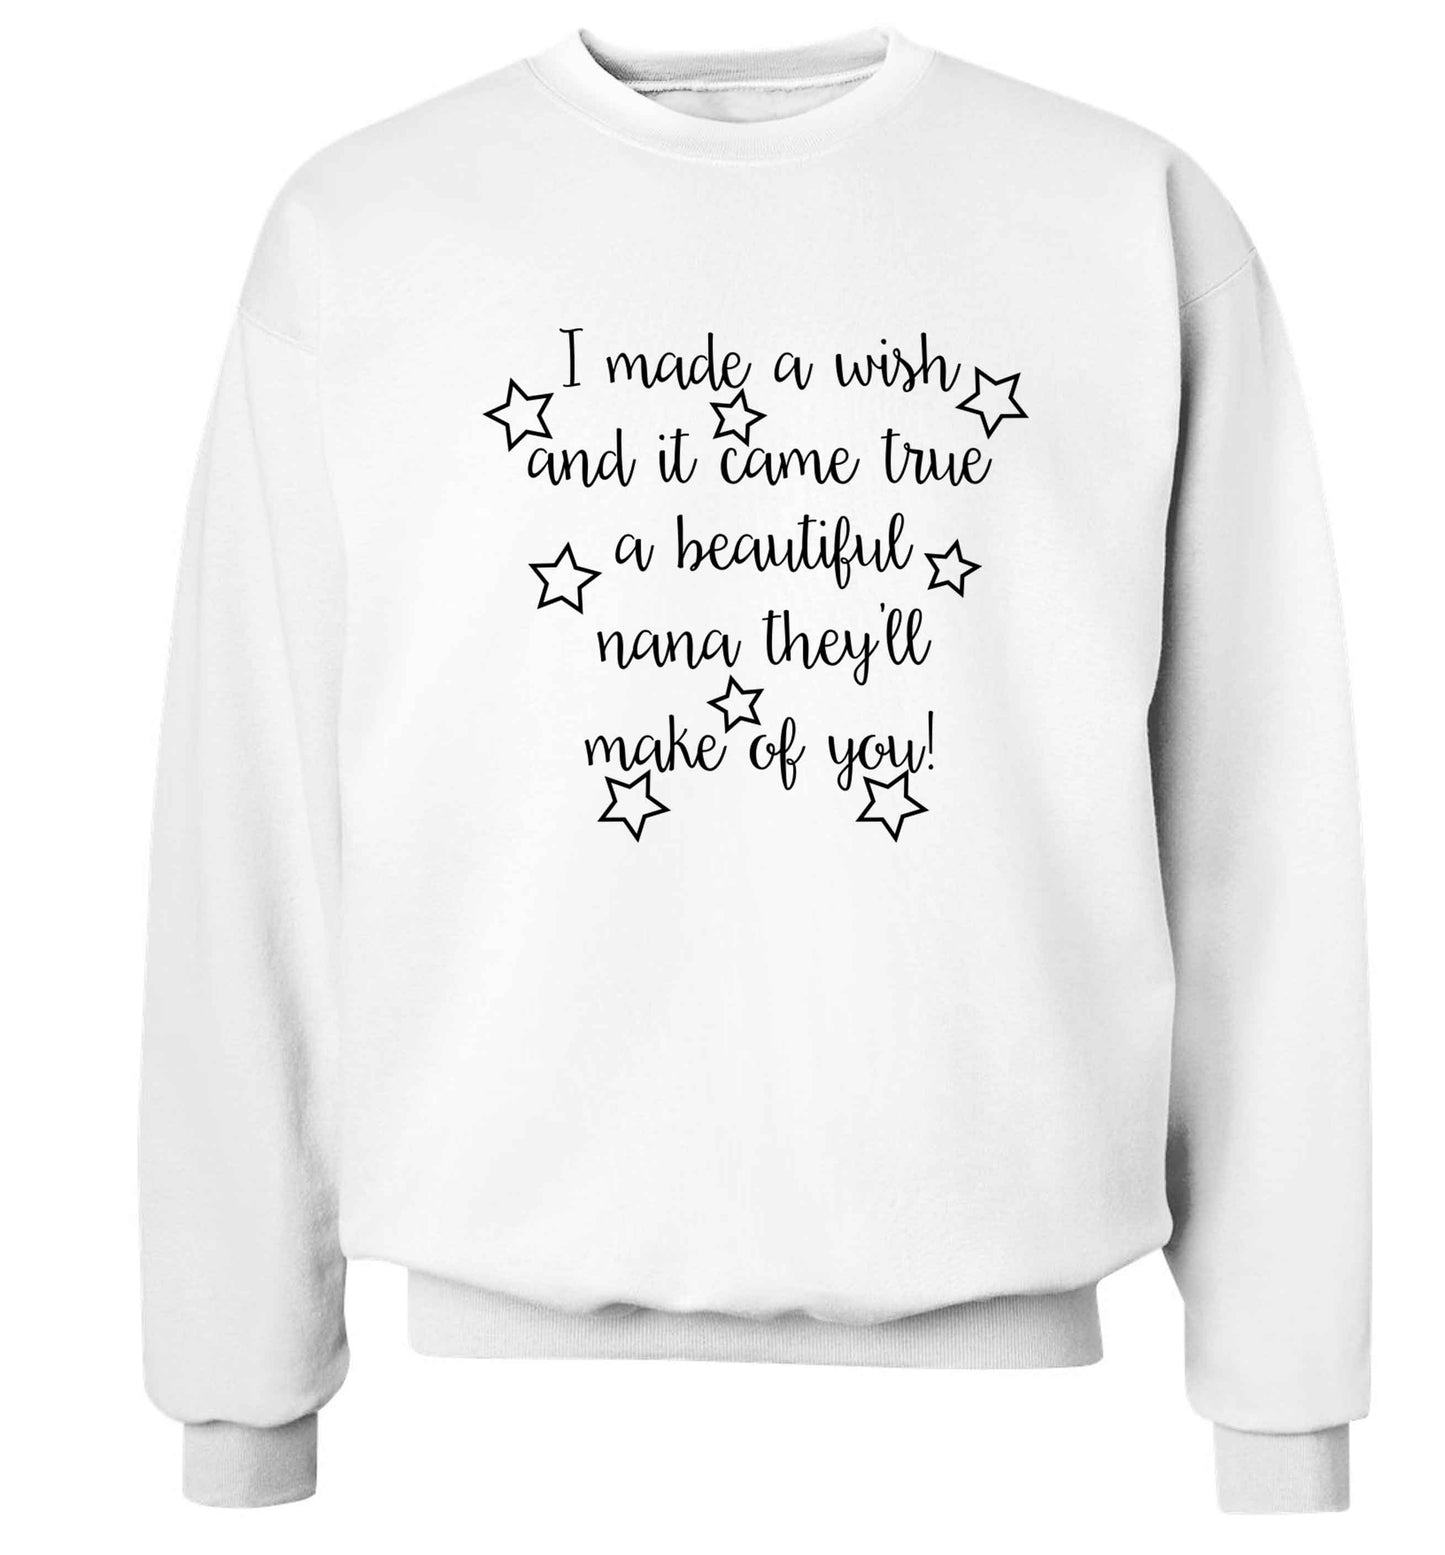 I made a wish and it came true a beautiful nana they'll make of you! Adult's unisex white Sweater 2XL